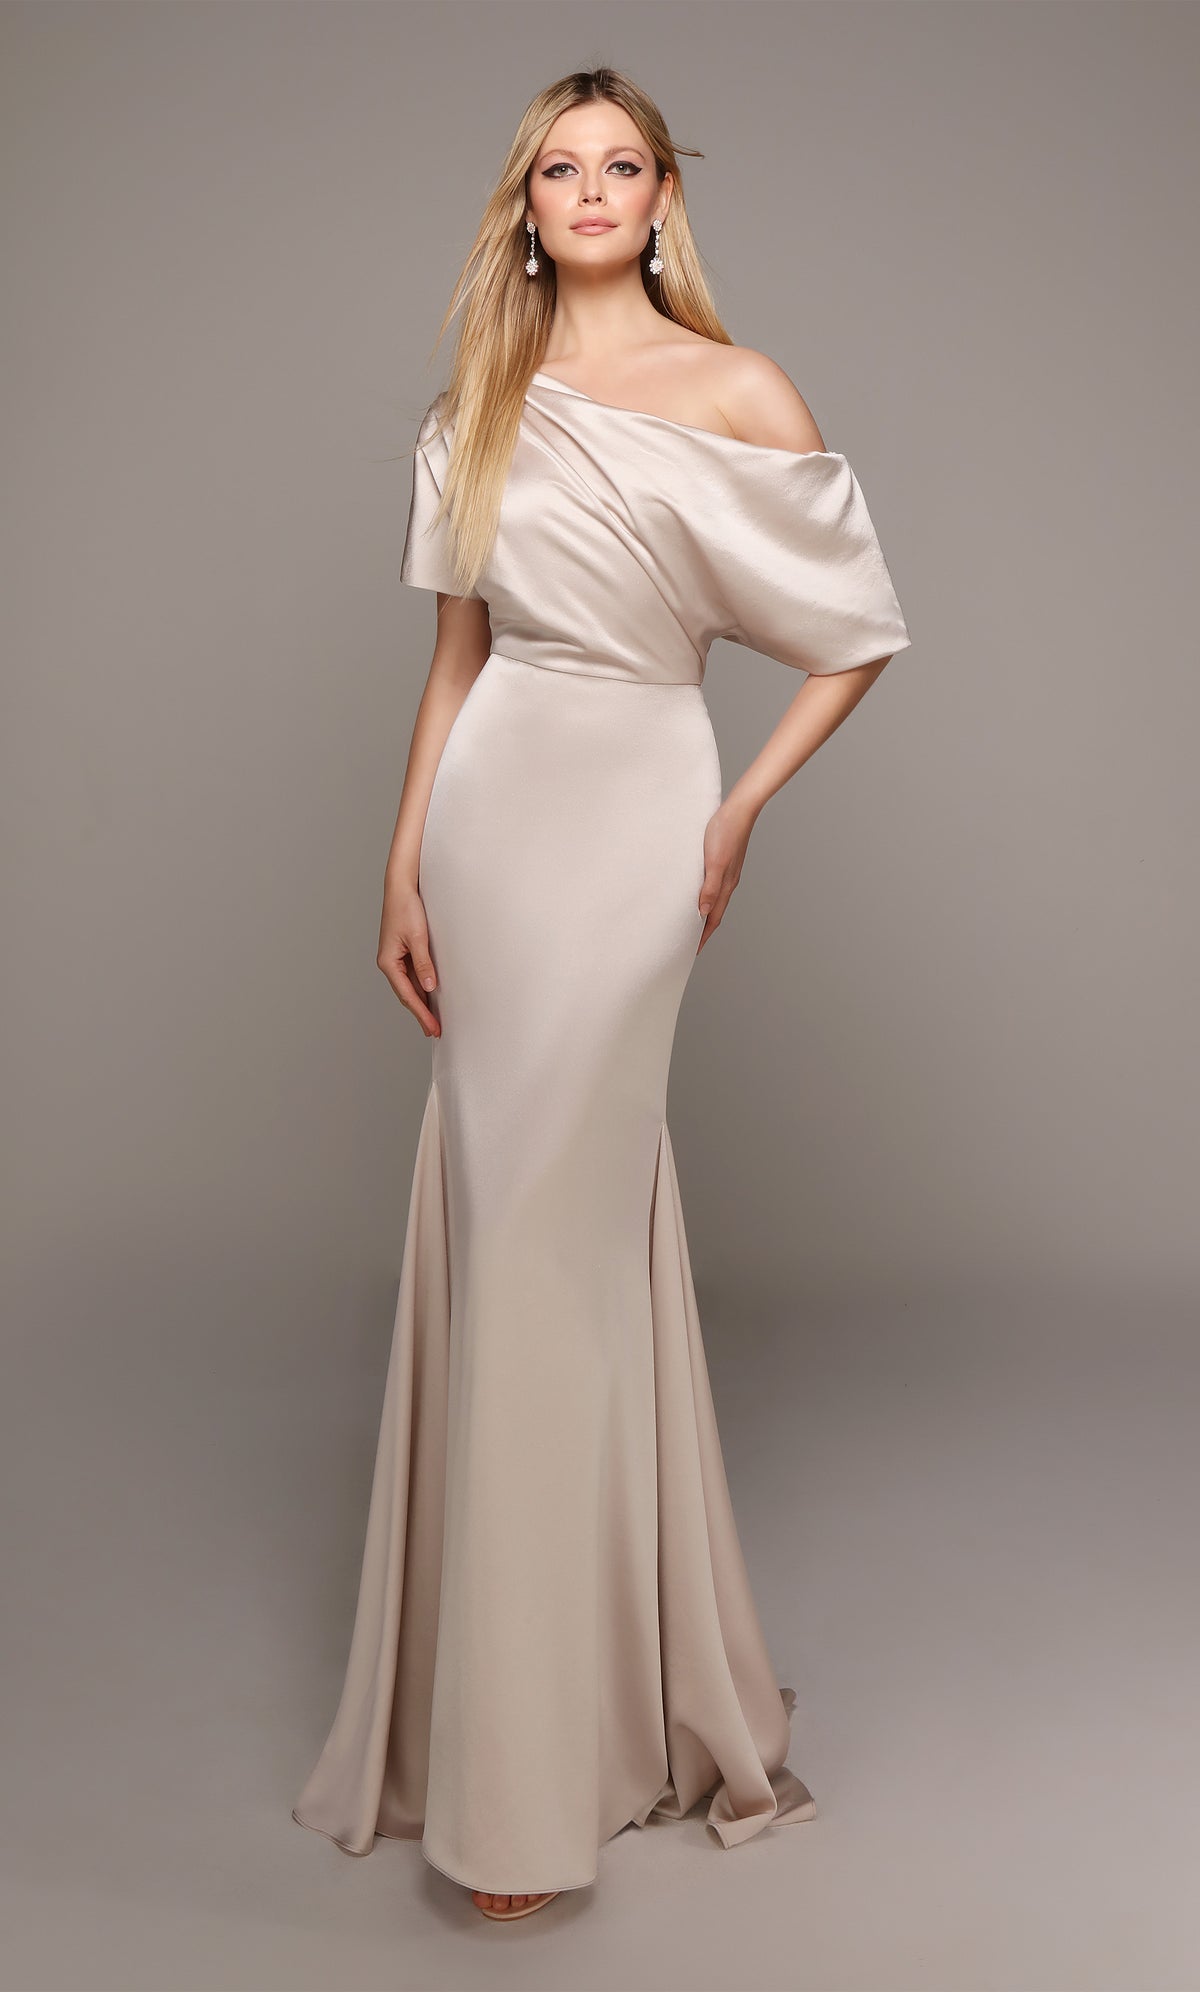 Mother of the bride drape dress in creme color.